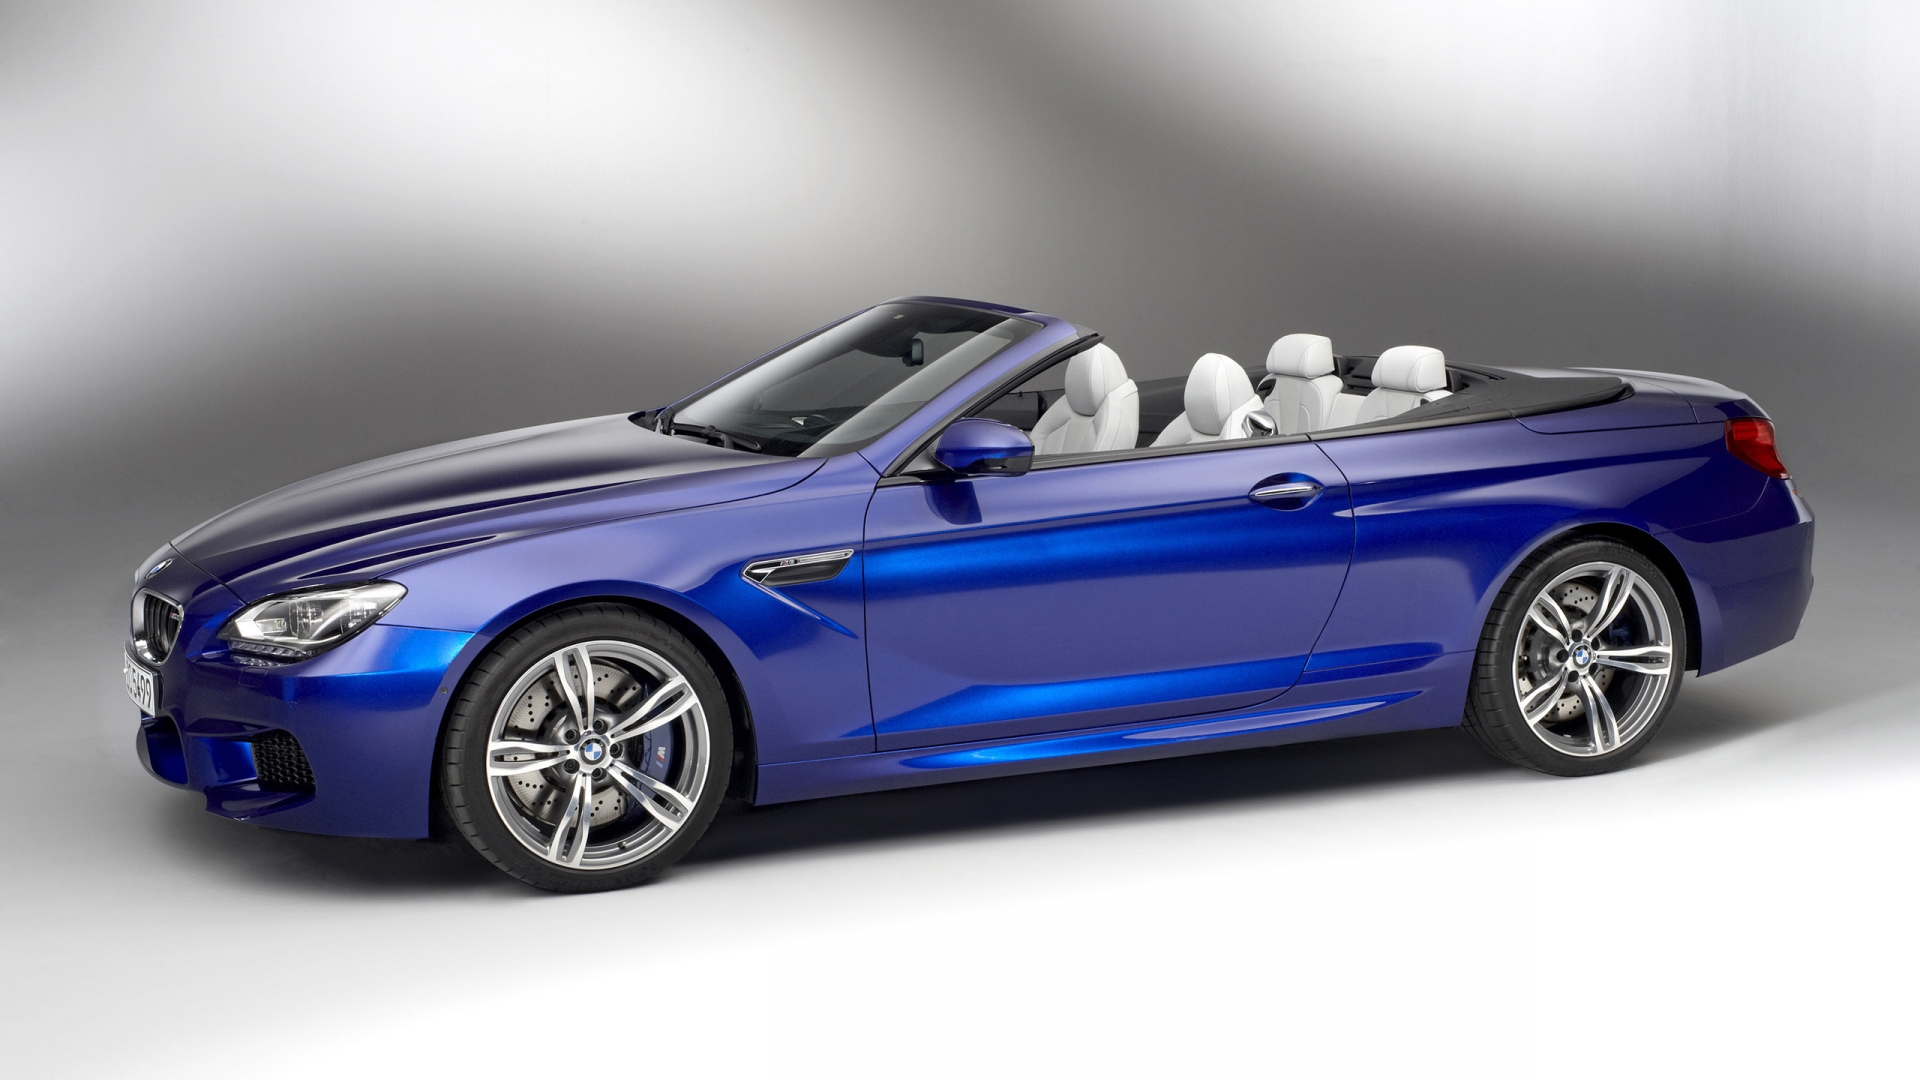 2013 BMW M6 Convertible for 1920 x 1080 HDTV 1080p resolution